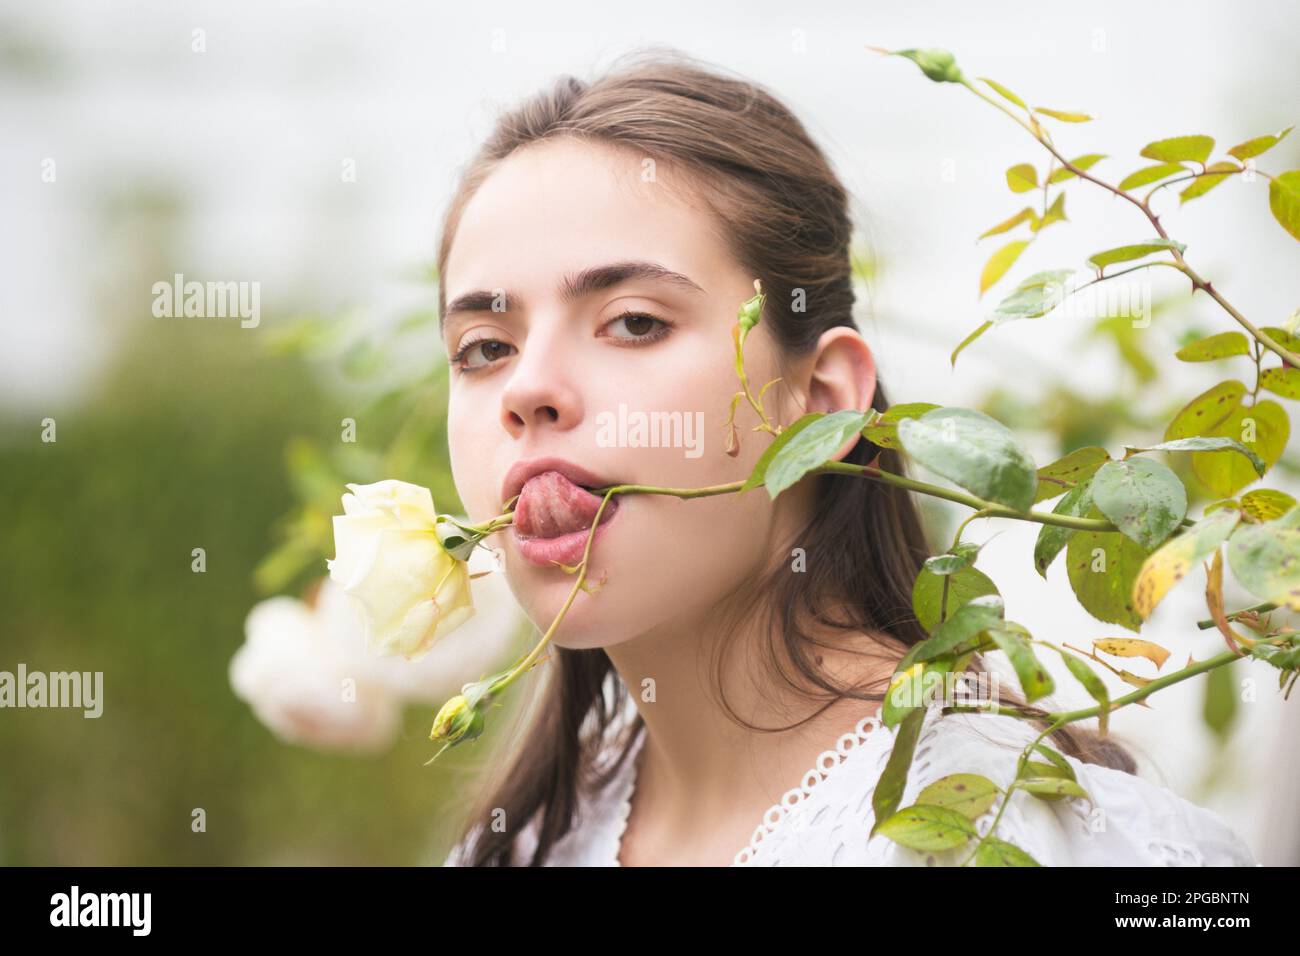 Spring girl. Young woman enjoying blooming spring garden. The concept of youth, love, fashion and lifestyle. Beautiful young girl in the park and a Stock Photo